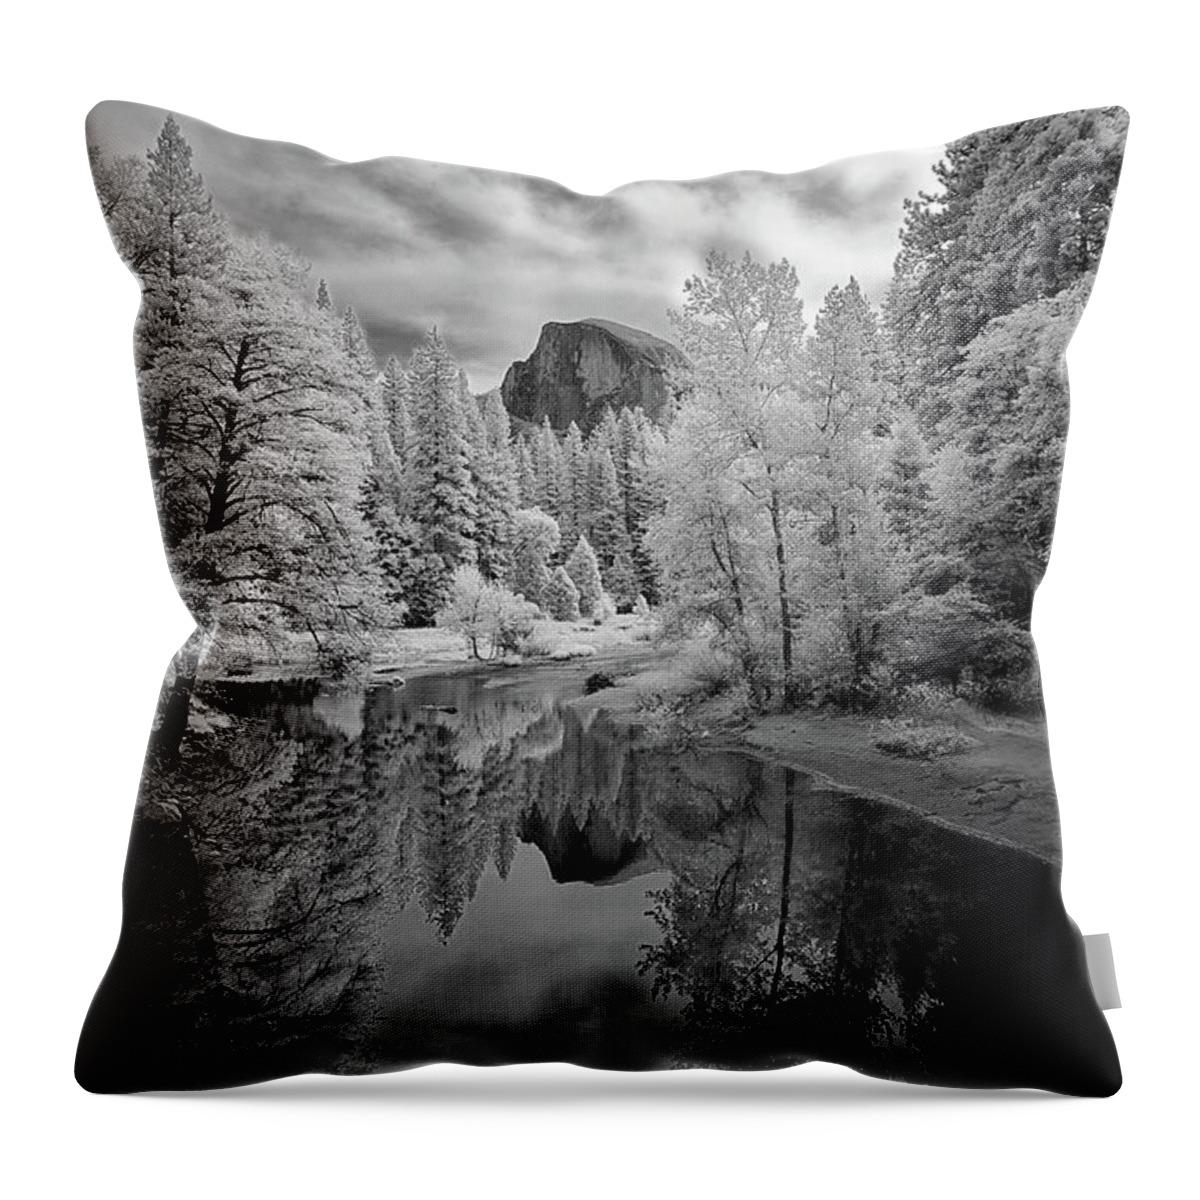 Mariposa County Throw Pillow featuring the photograph Half Dome by Liordrz© Photography